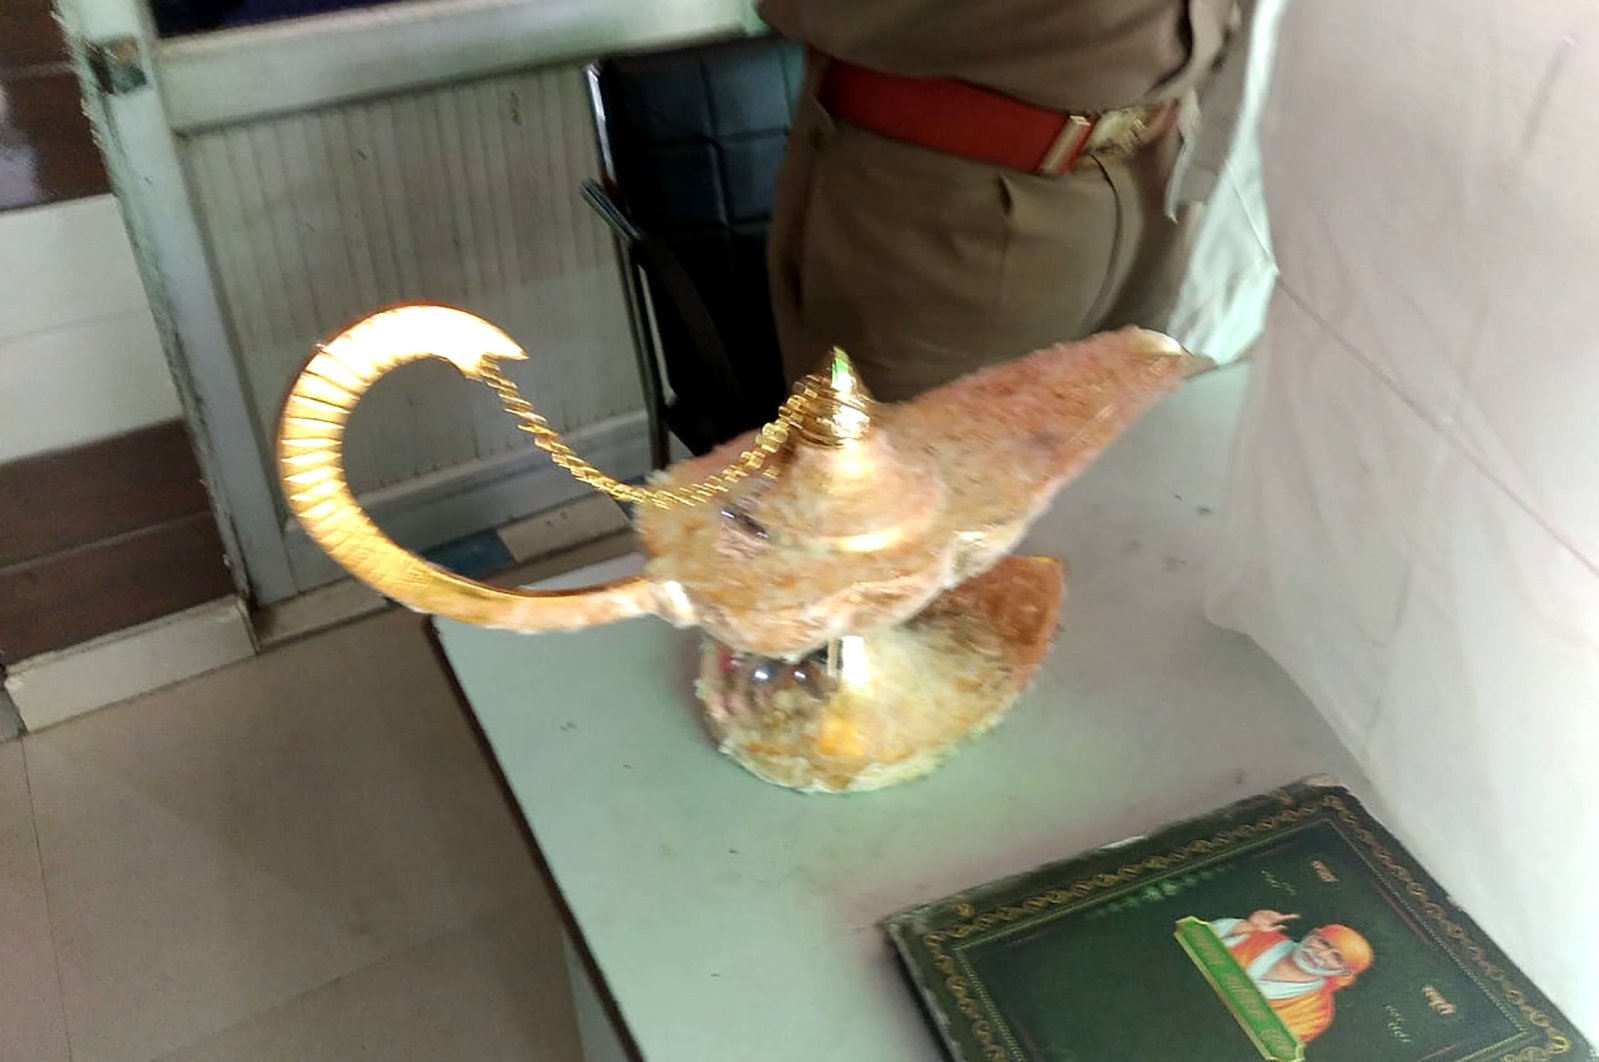 The lamp that was allegedly sold for $93,000 with the claim that it had magical powers, as described in the popular folk tale "Aladdin," at the Brahampuri police station in New Delhi, Oct. 29, 2020. (Uttar Pradesh Police Photo via AFP)